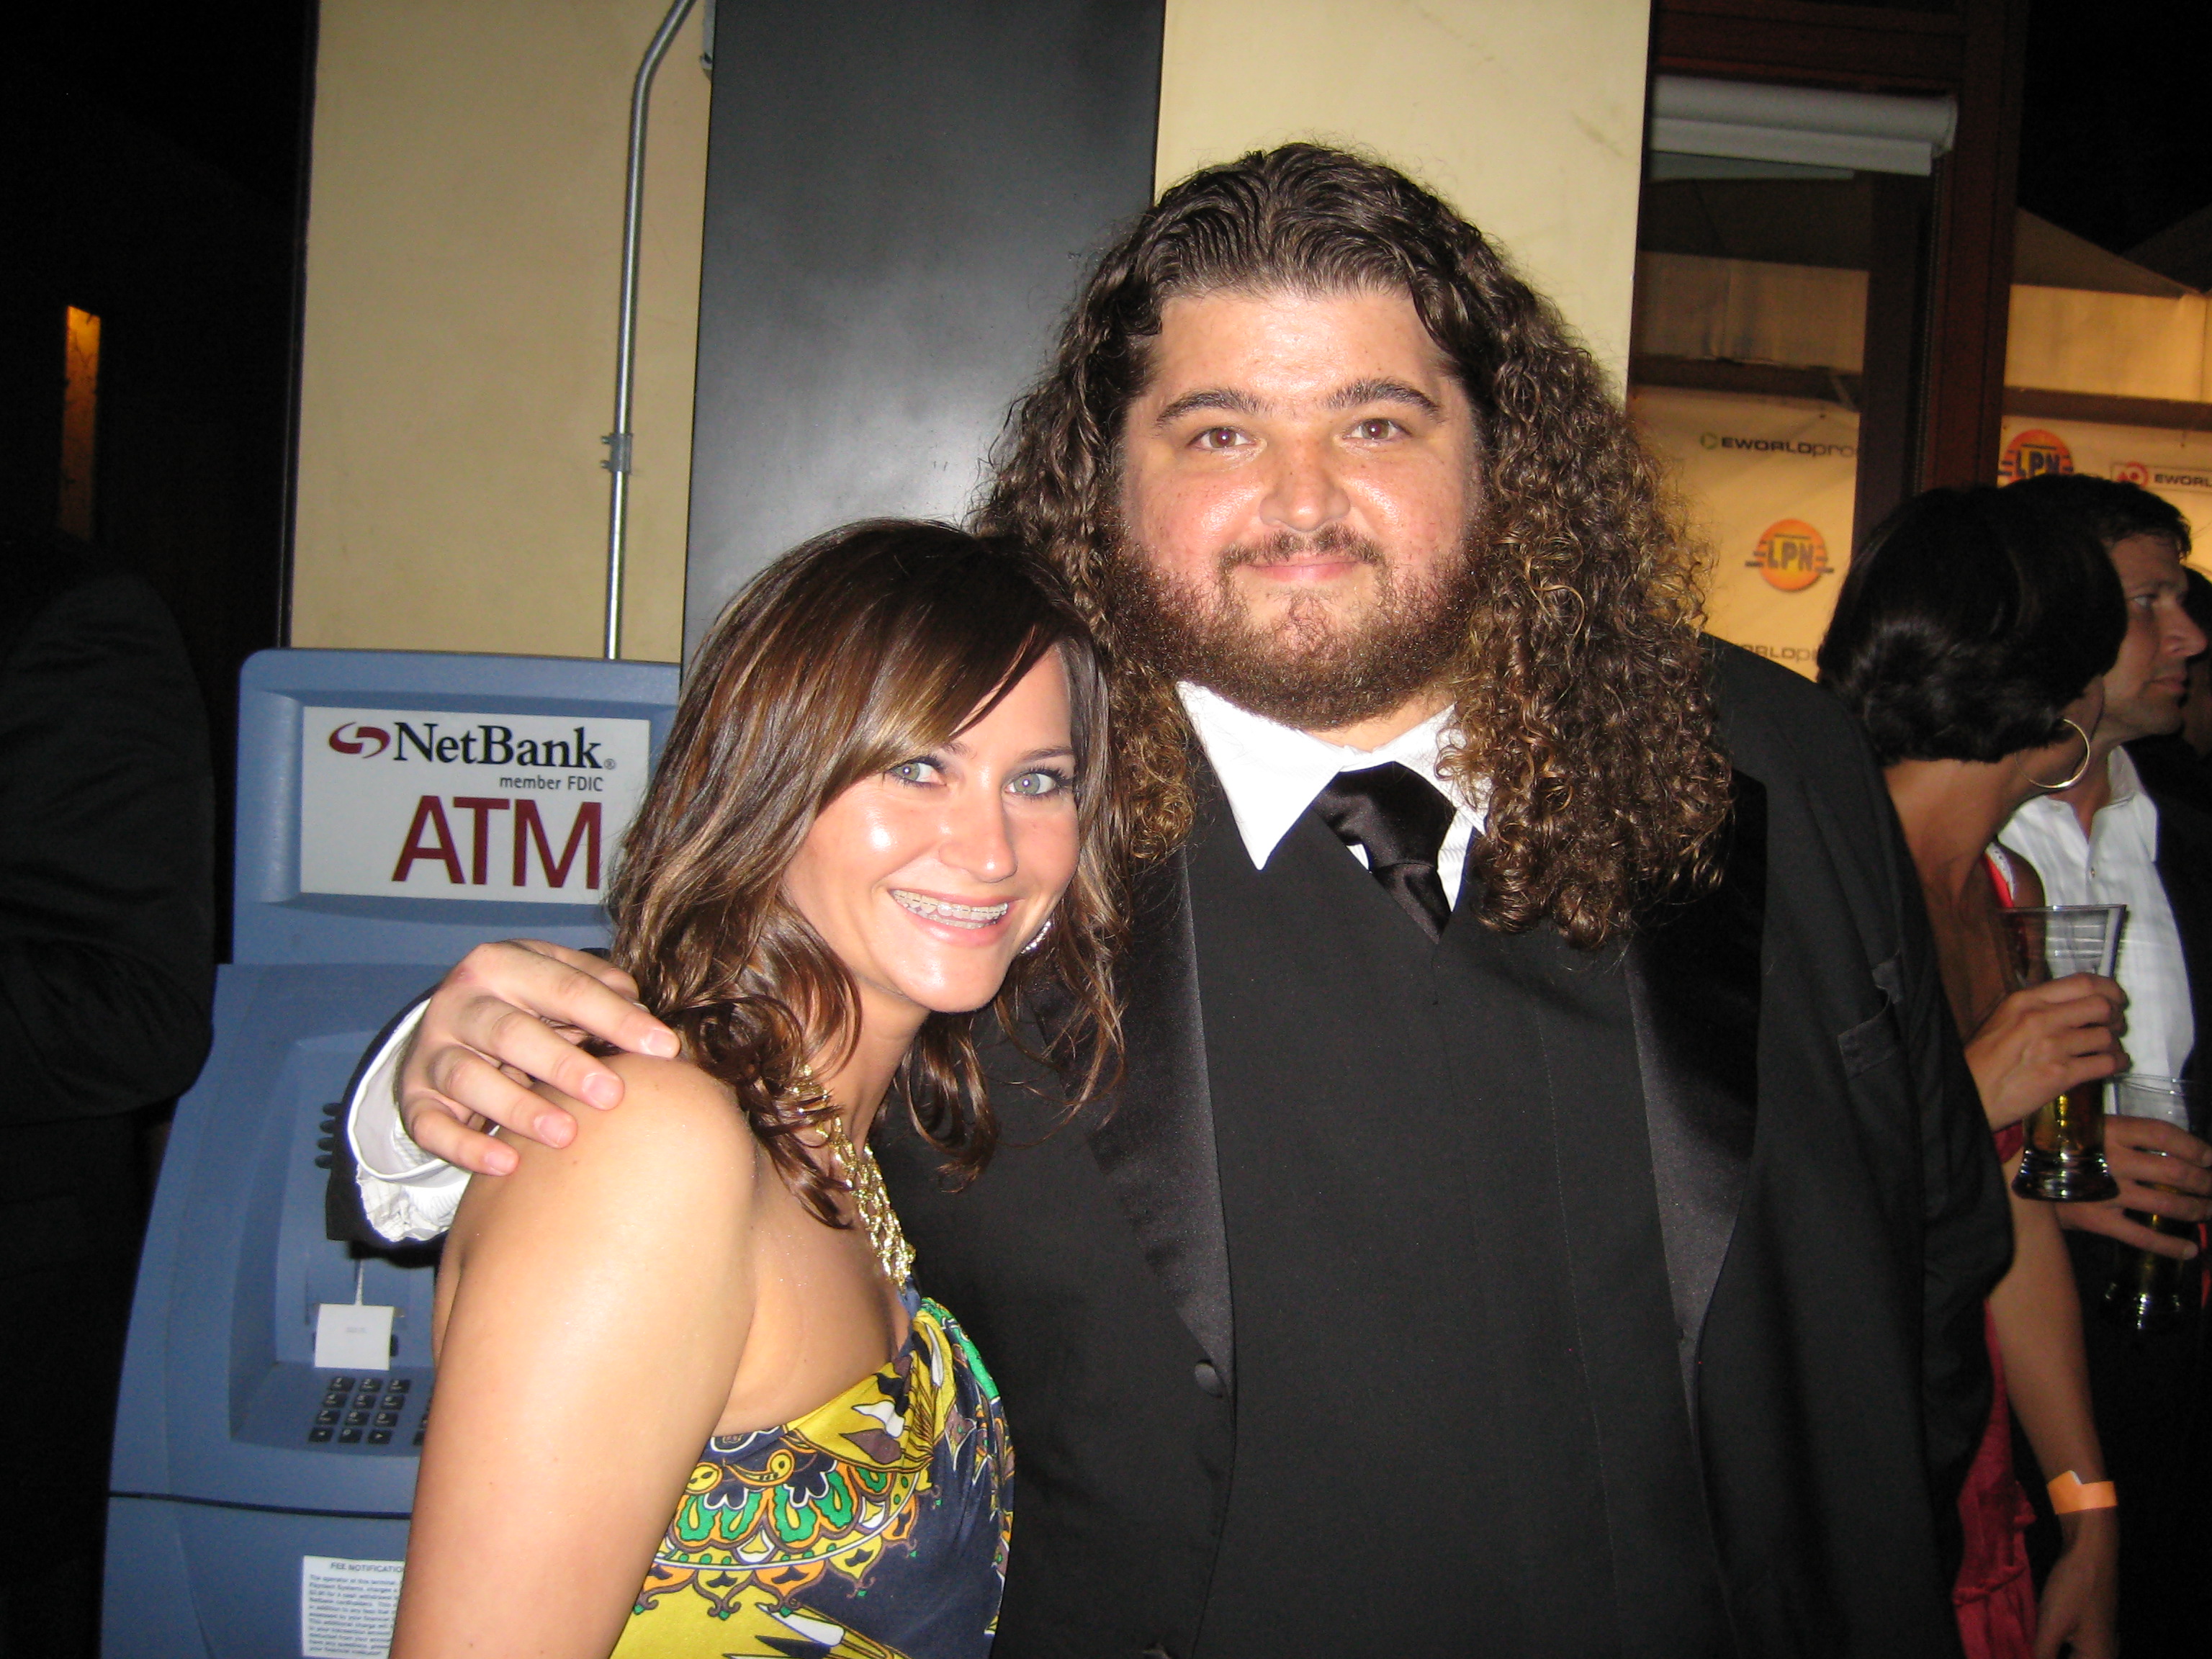 Marta Cena and Jorge Garcia from Lost, How I Met Your Mother, Mr. Sunshine, Fringe and Alcatraz.